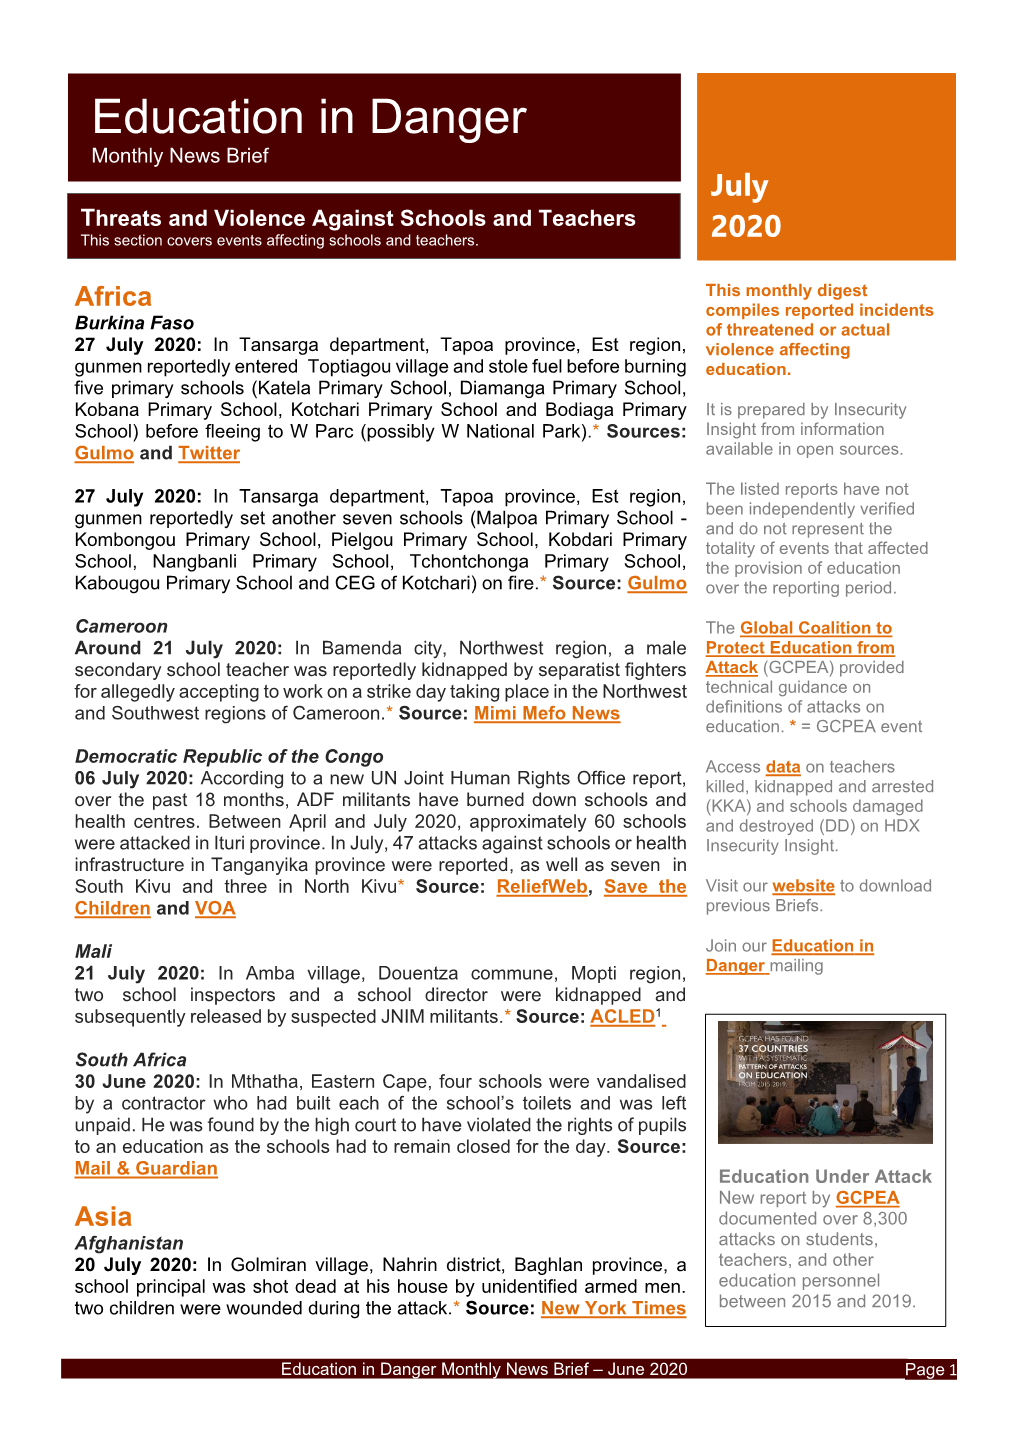 Education in Danger Monthly News Brief July Threats and Violence Against Schools and Teachers This Section Covers Events Affecting Schools and Teachers